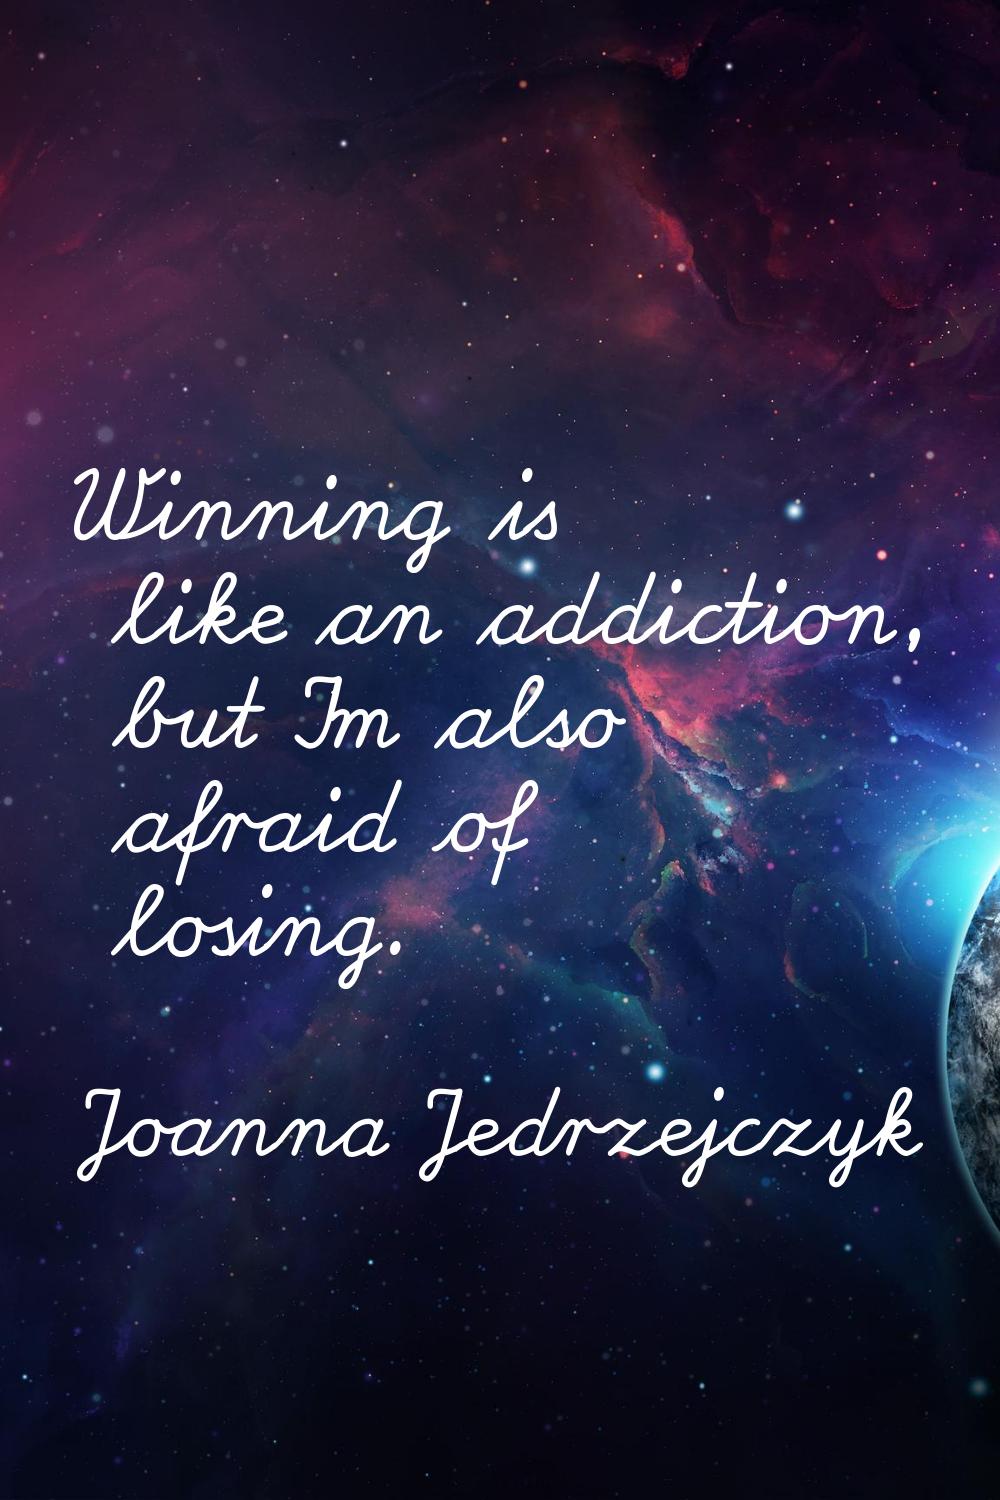 Winning is like an addiction, but I'm also afraid of losing.